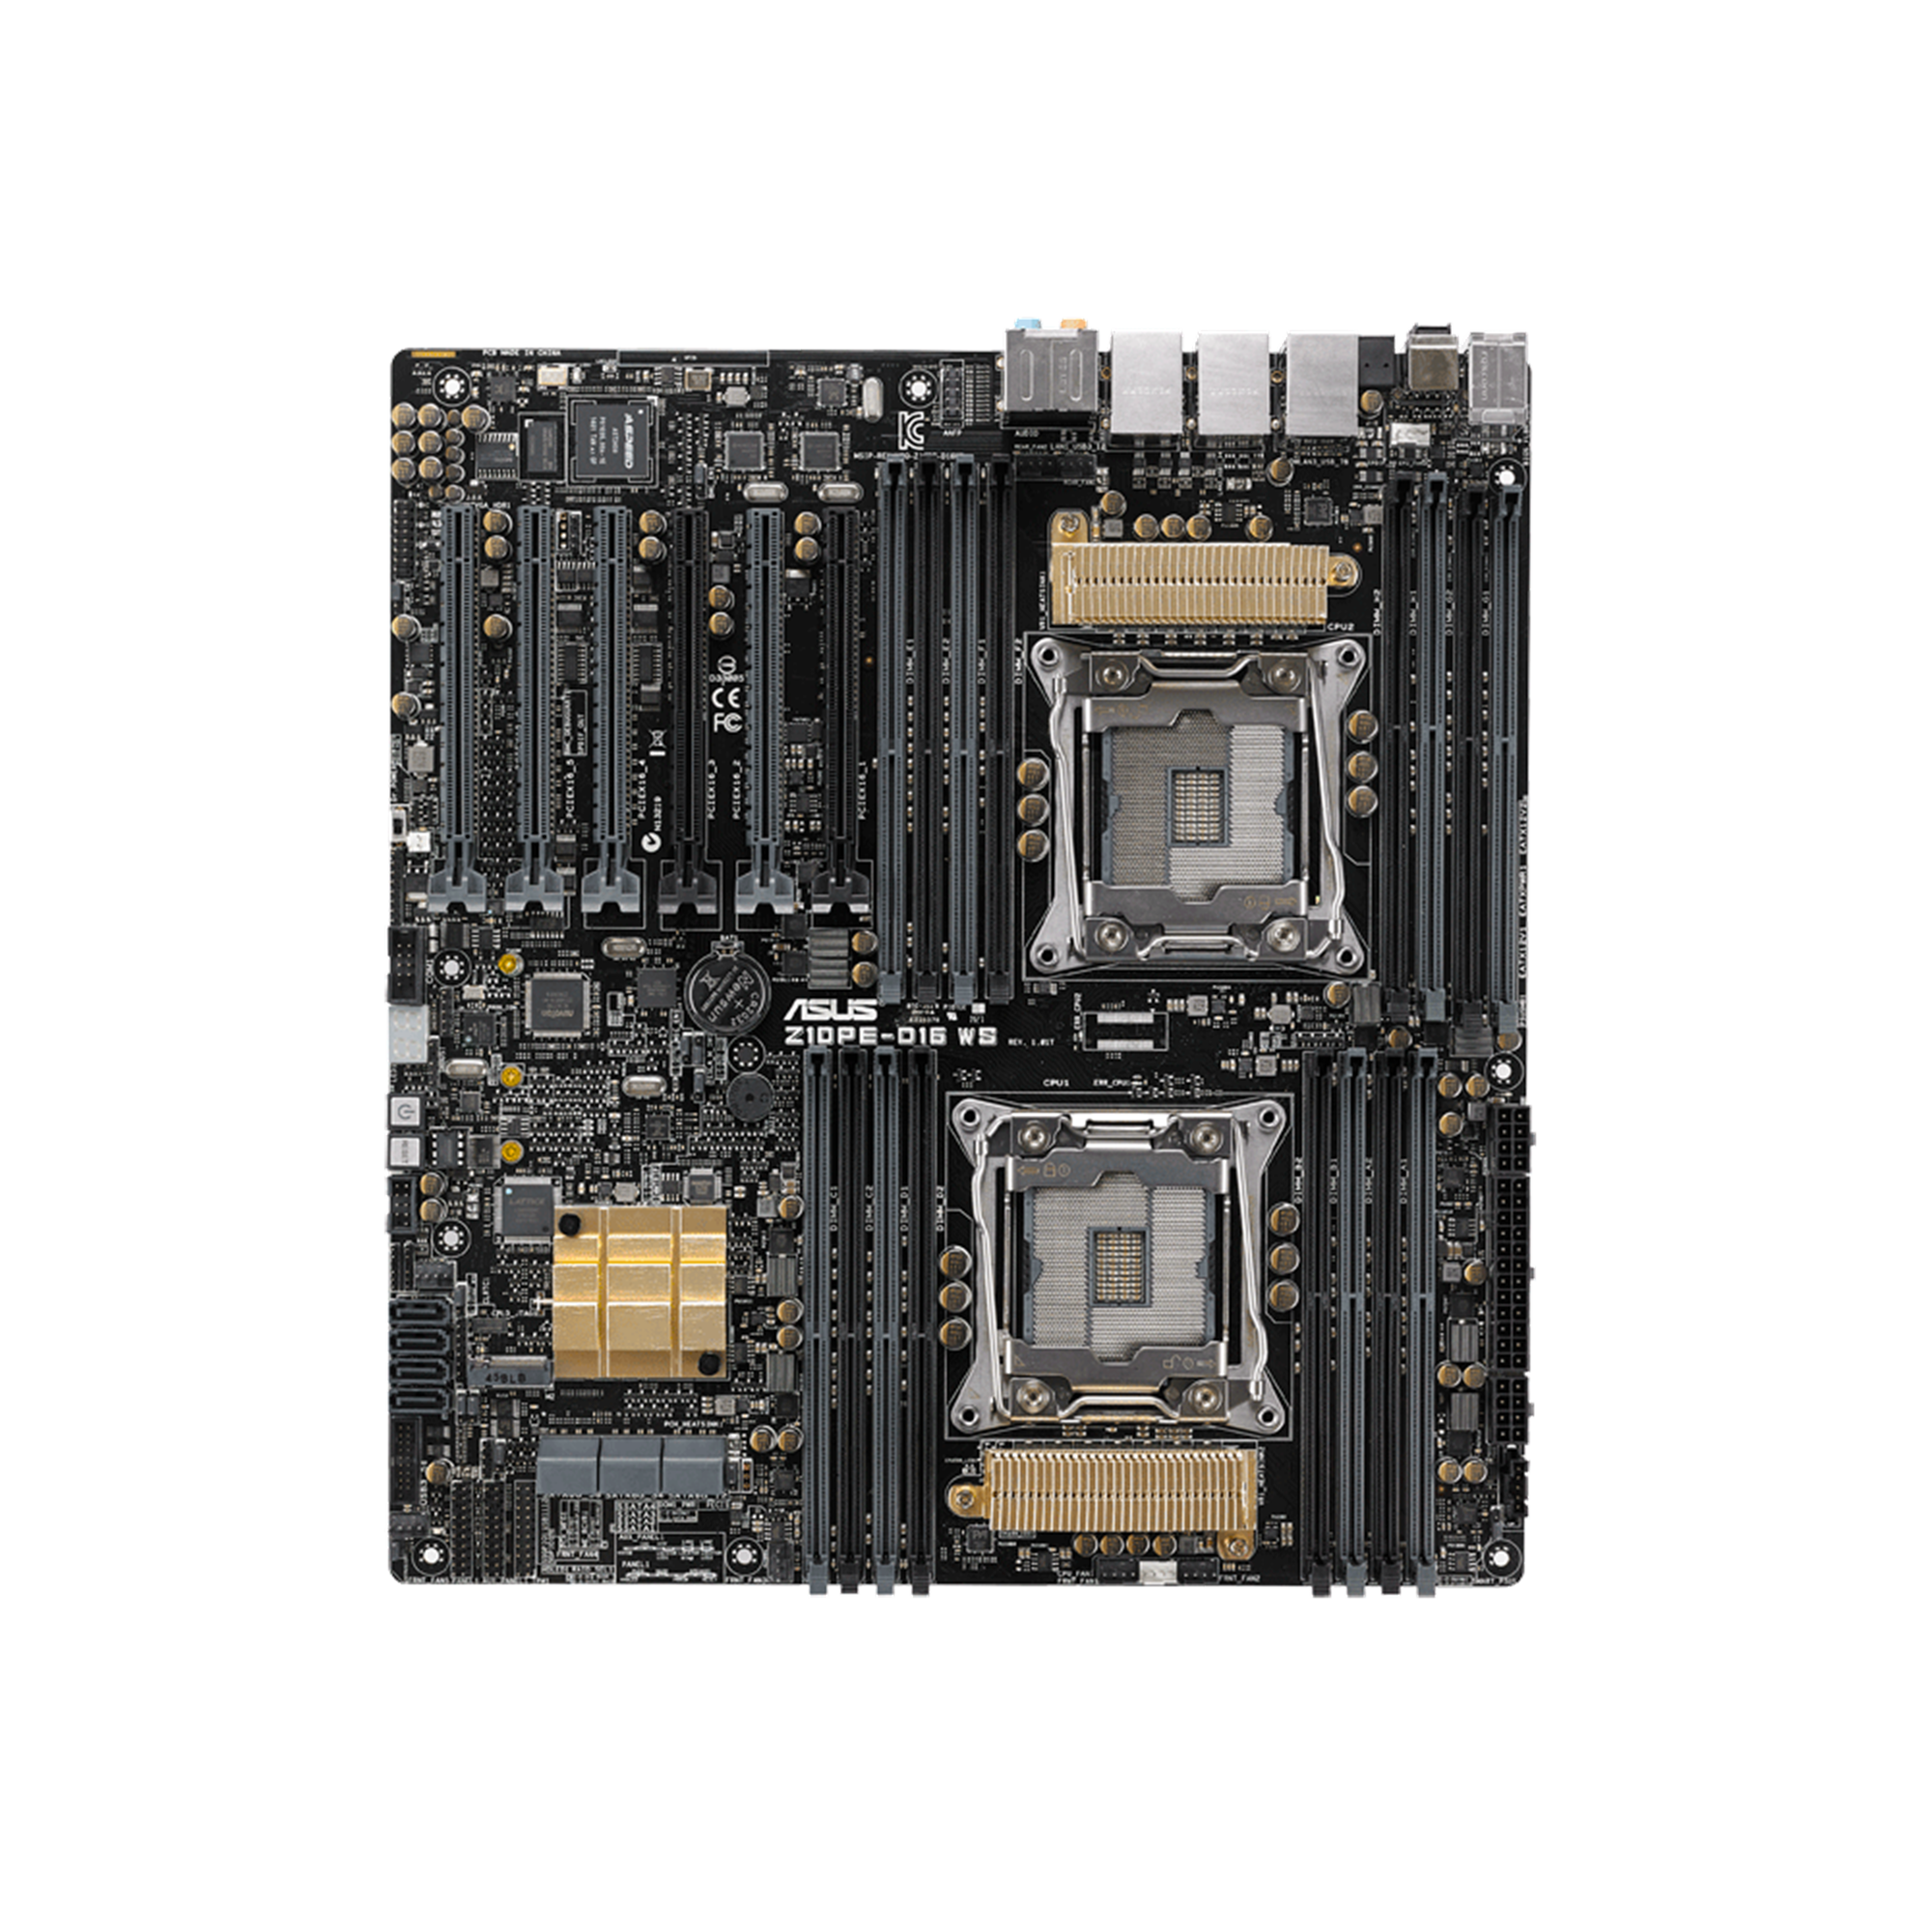 Z 3 z 10 0. ASUS z10pe-d8. Z10pe-d8 WS. ASUS z9pe-d8 WS. Материнская плата ASUS z10pe-d8 WS motherboard.